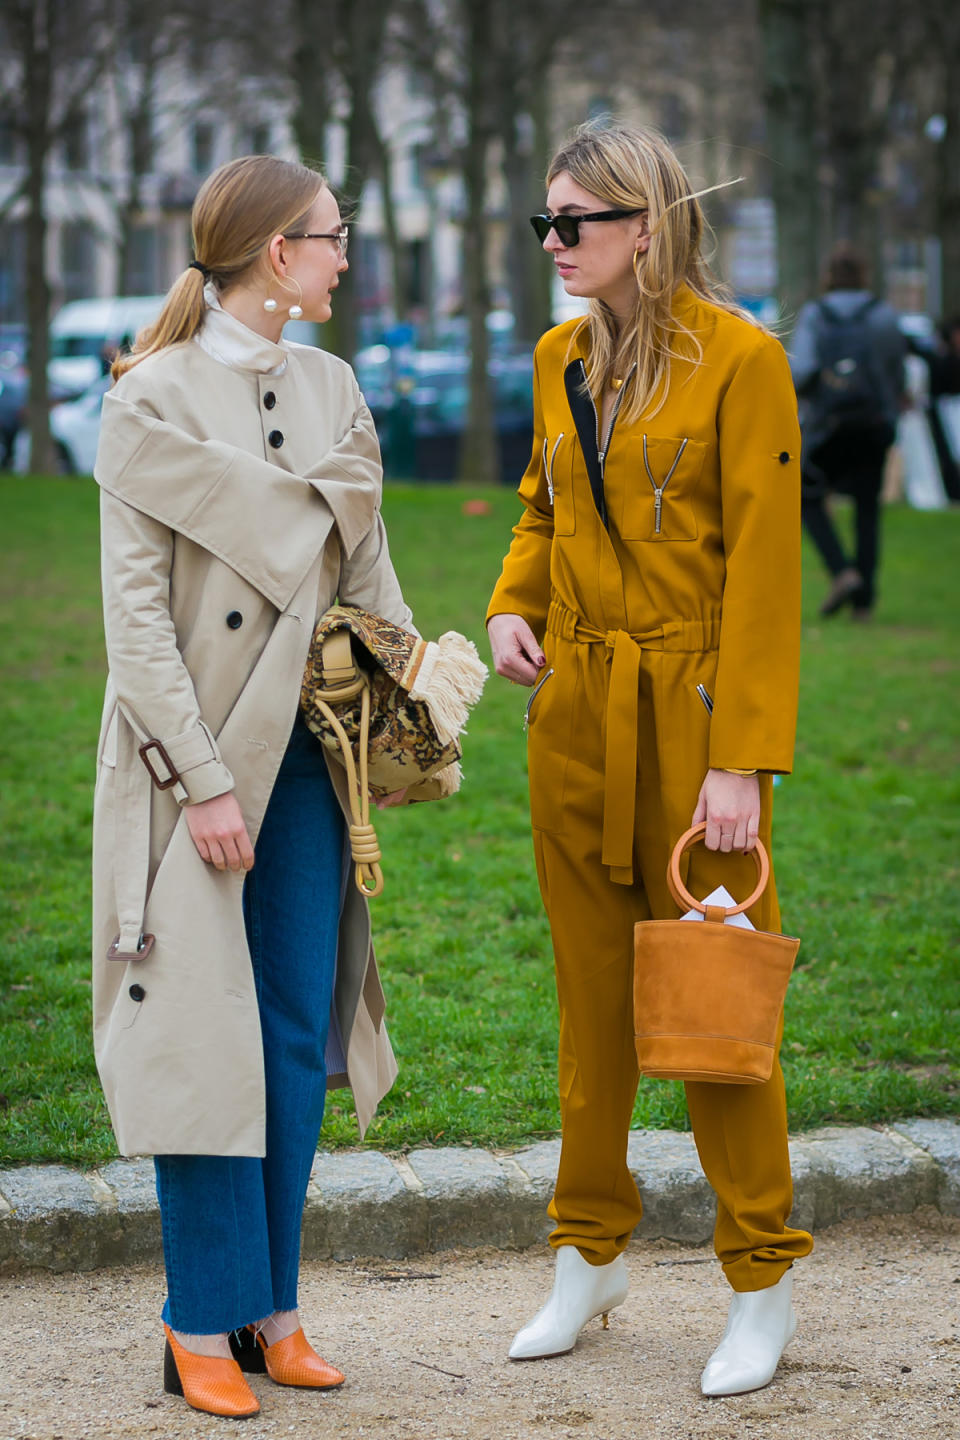 Alexandra Carl and Camille Charriere make a perfect pair in oddball neutrals.